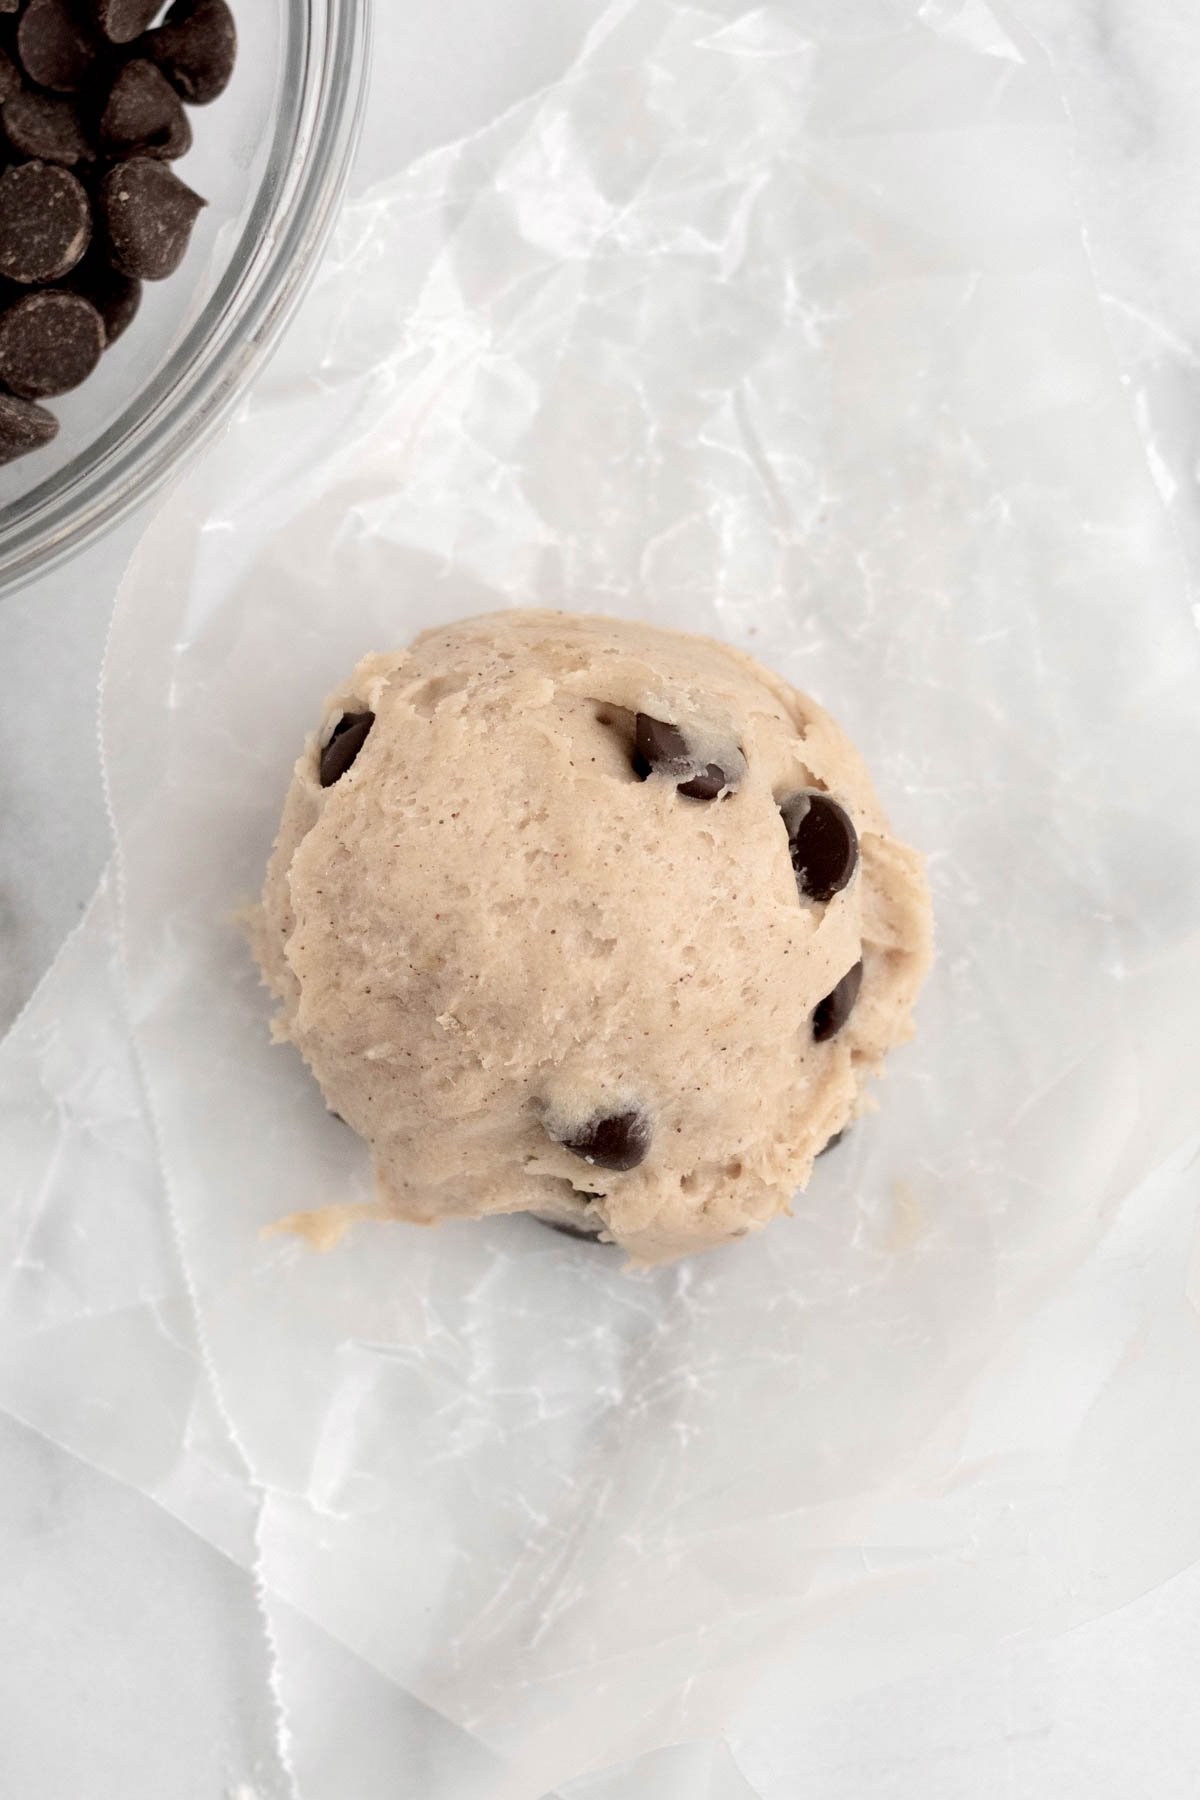 A scooped ball of cookie dough.